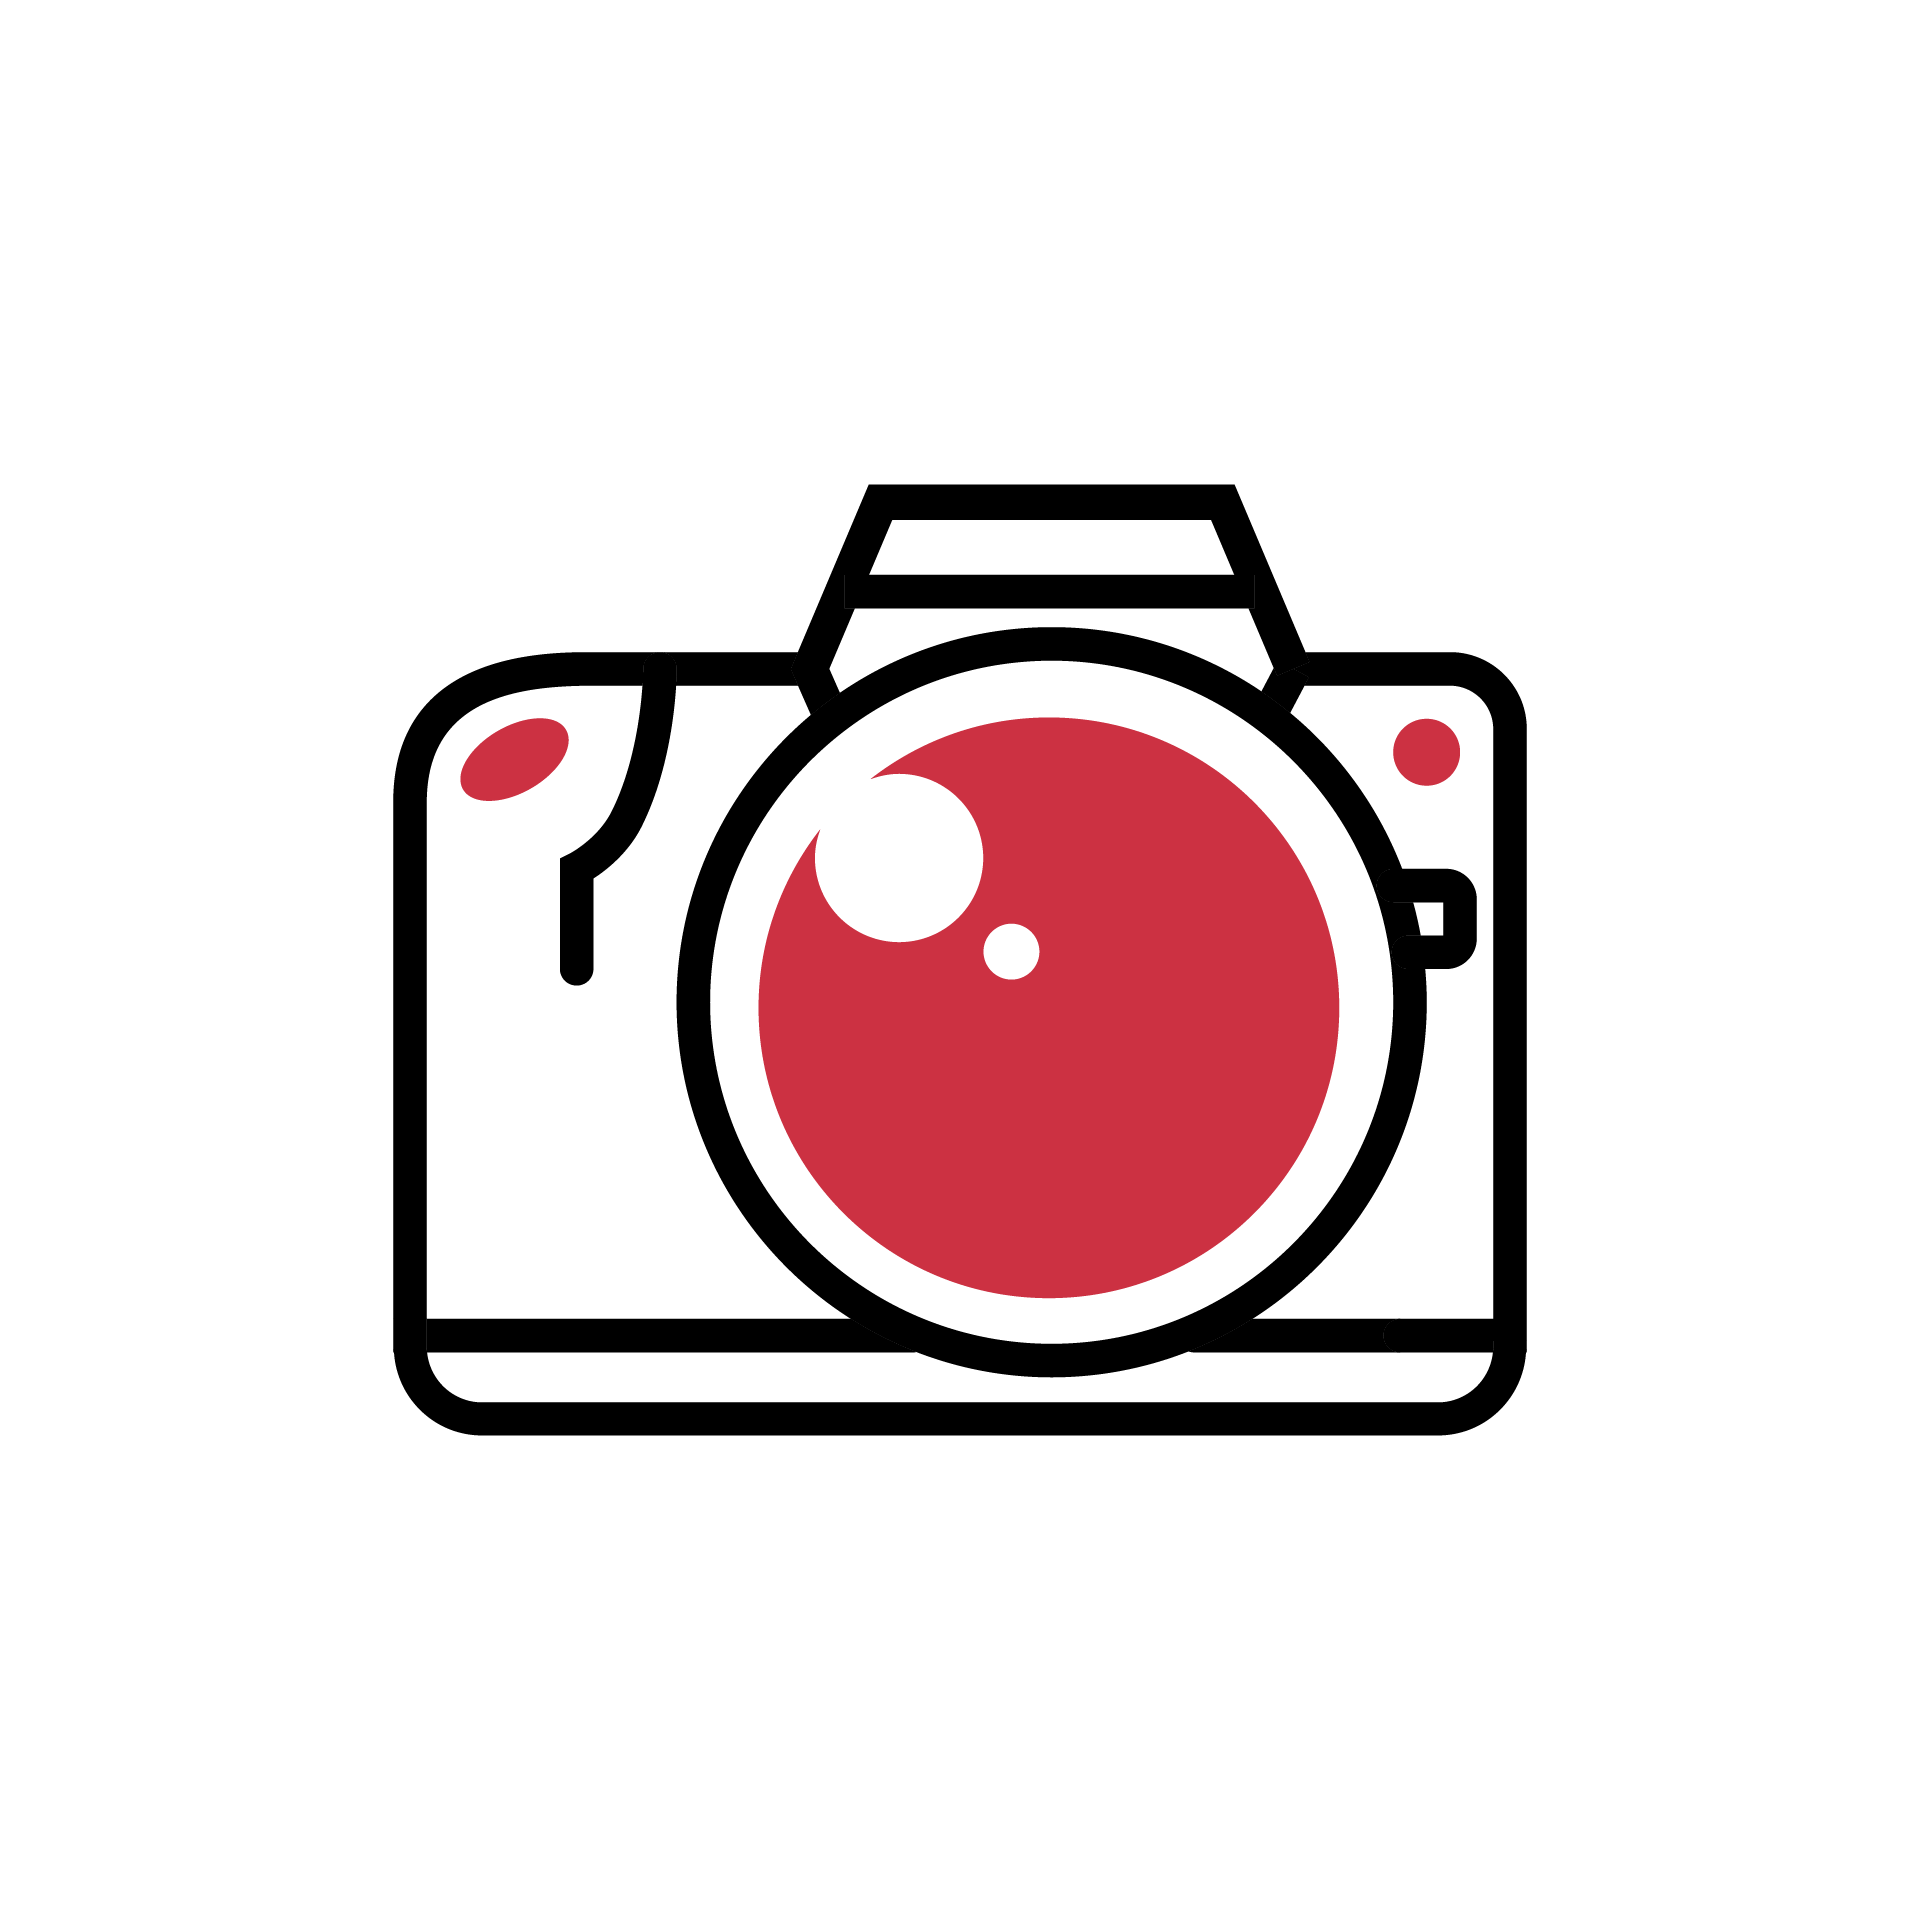 Camera with lens icon